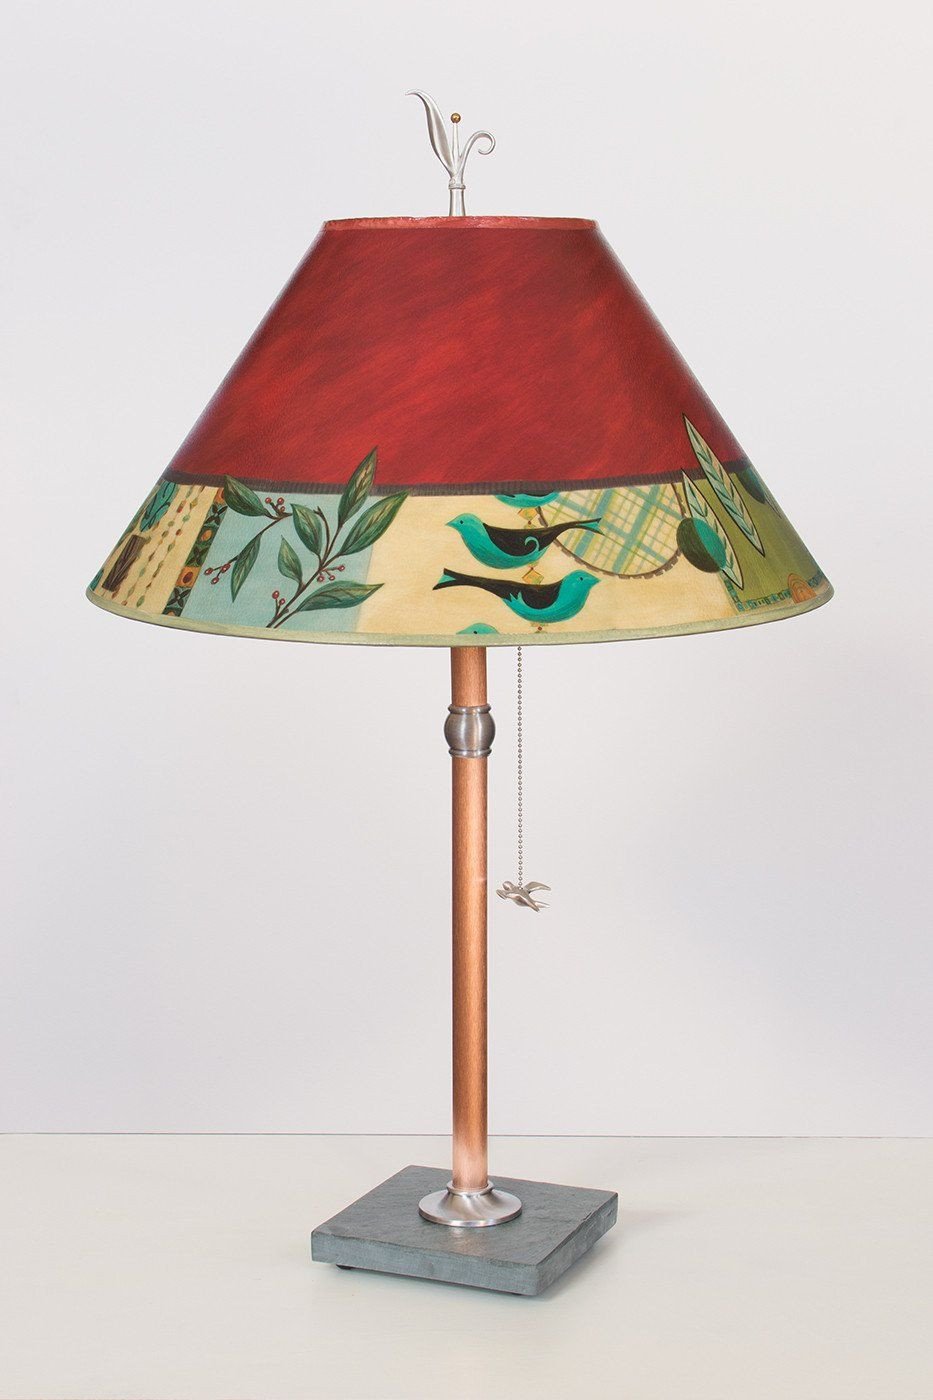 Copper Table Lamp on Vermont Slate with Large Conical Shade in New Capri